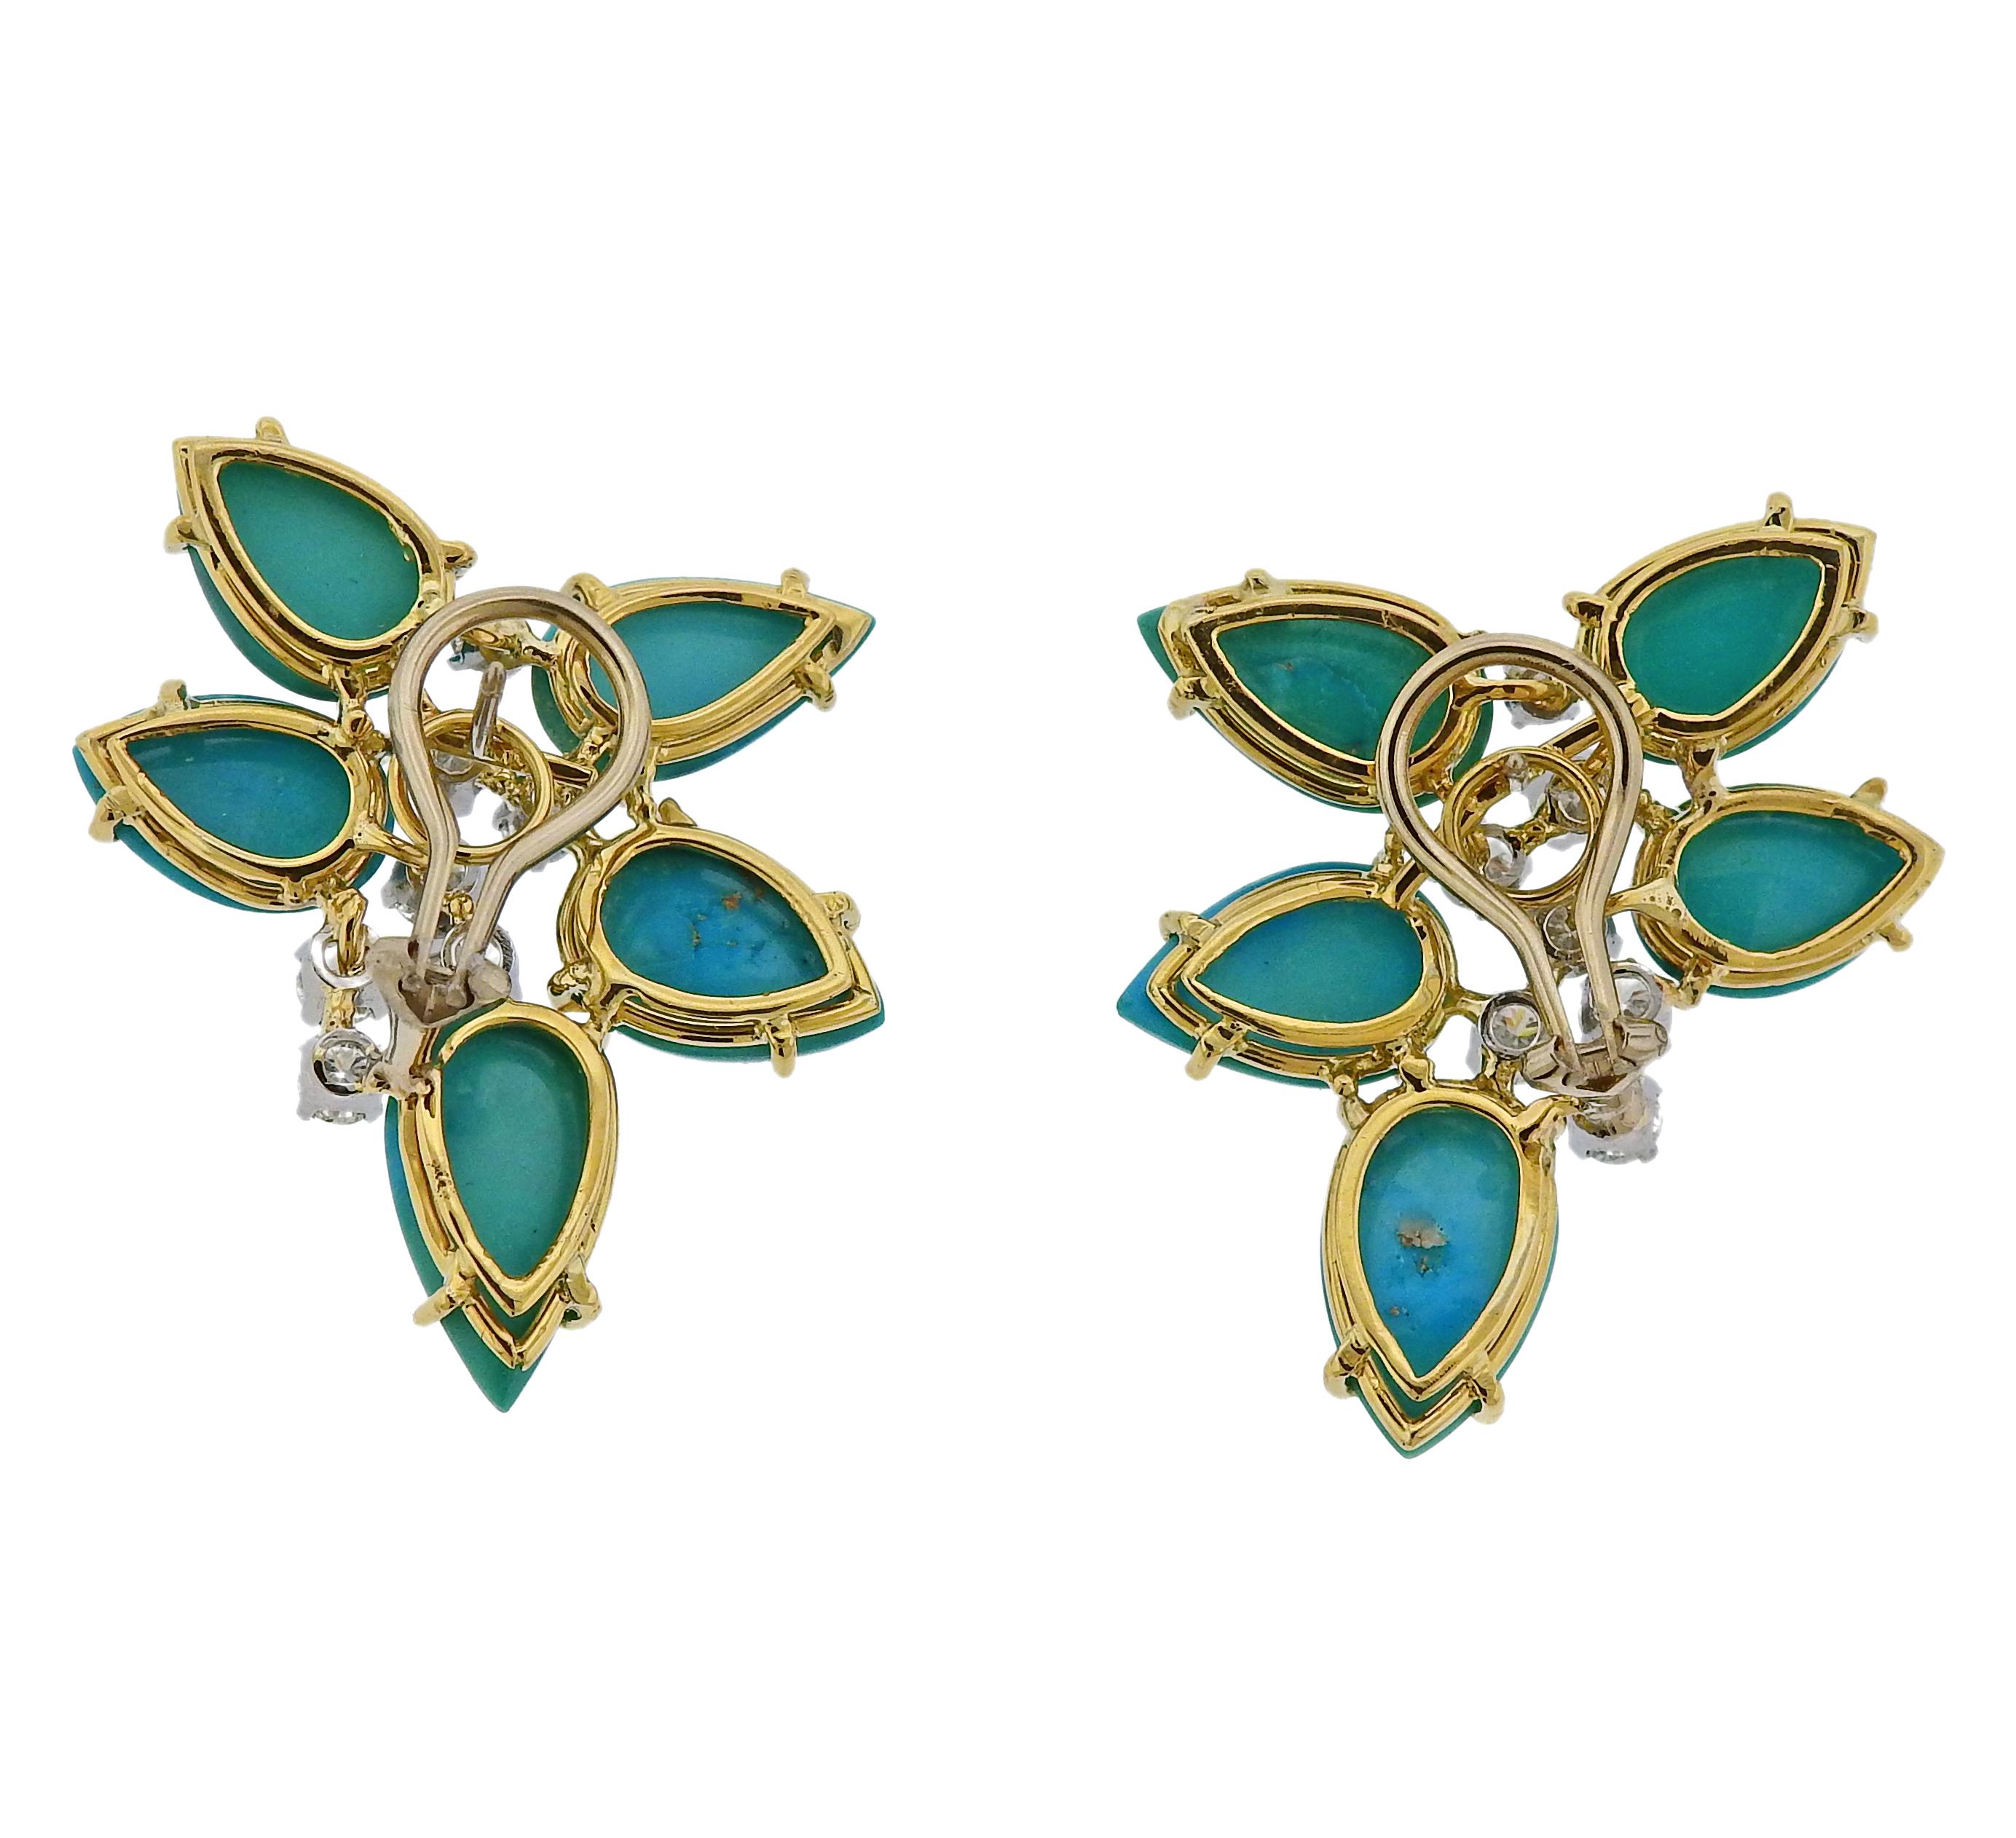 Pair of large cocktail earrings, set in 18k gold, adorned with turquoise and approx. 1.80ctw in GH/VS diamonds. Earrings are measured 40mm x 34mm.
Weight is 20.7 grams. Marked: 18K.